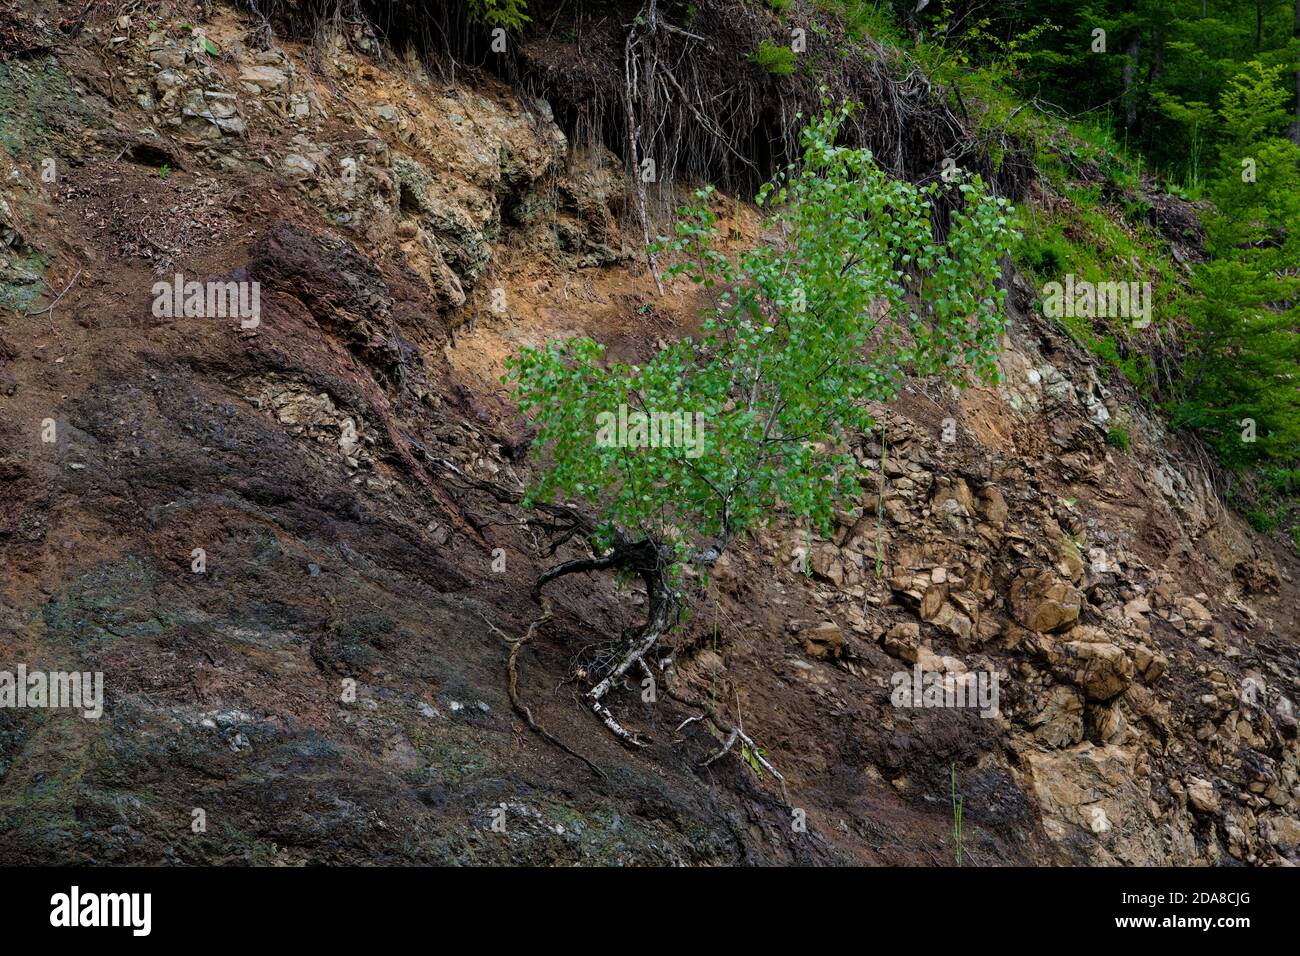 A solitary wild tree with amazing roots, on a steep cliff, beautiful nebari Stock Photo